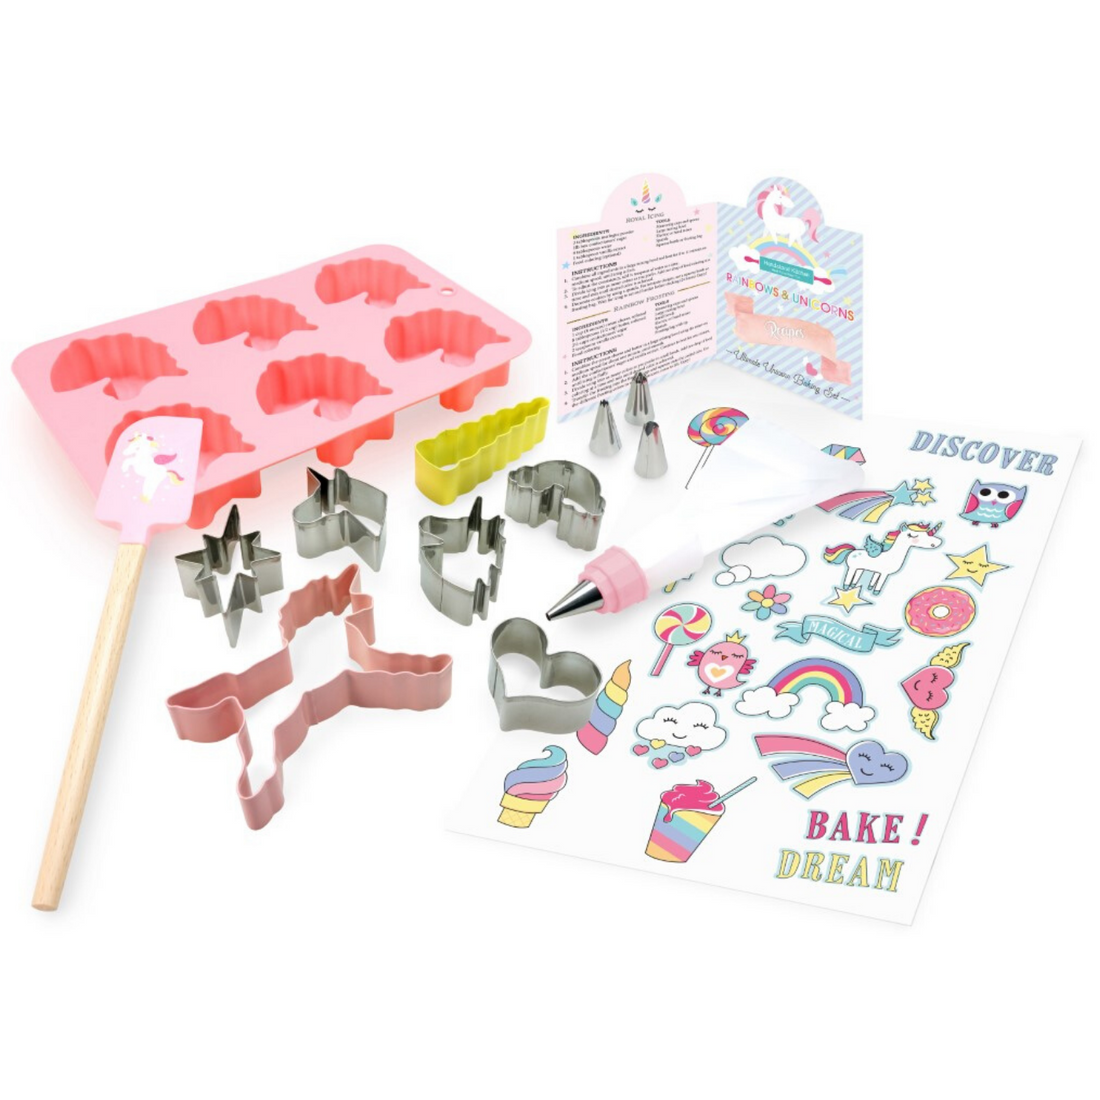 Out of box of Rainbows &amp; Unicorns Ultimate Baking Party Set. Includes: 2 large and 5 mini unicorn-themed stainless steel cookie cutters, 1 unicorn-shaped silicone cupcake mold, 1 silicone spatula, 1 frosting bag with coupler, ring and 3 tips, a sticker sheet and recipes.